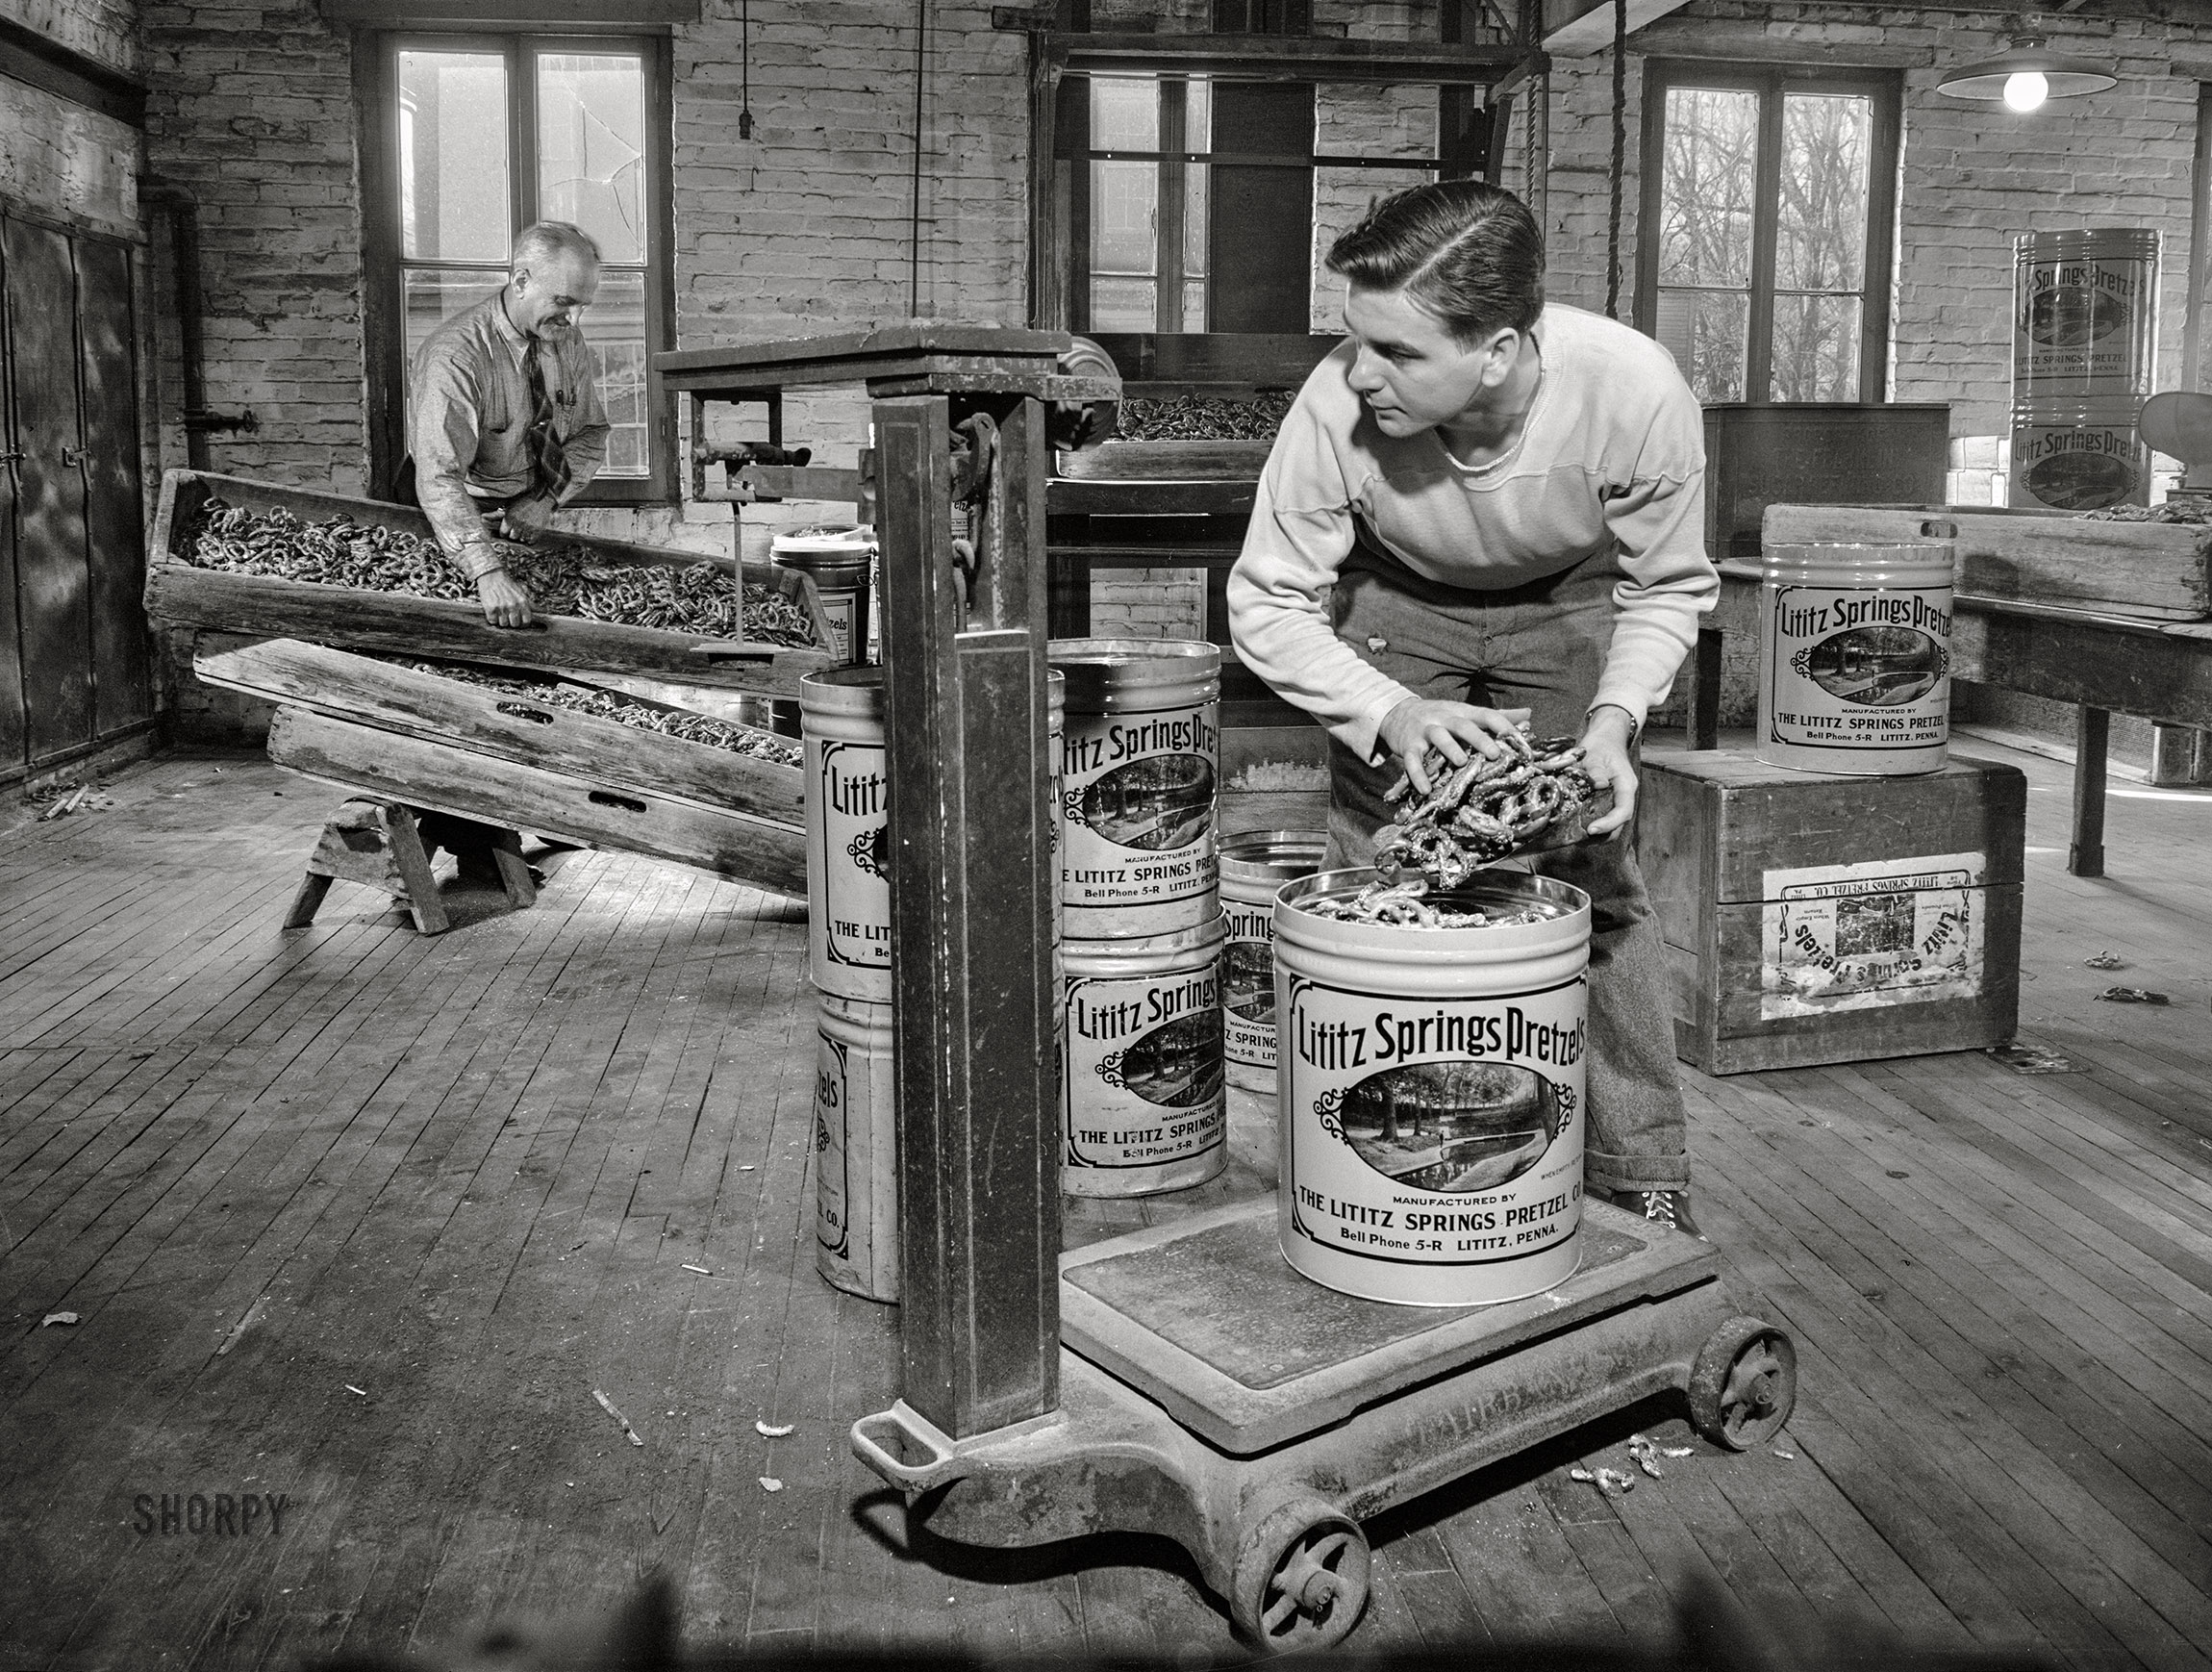 November 1942. Lititz, Pennsylvania. "Lititz Springs Pretzel Company, owned by Lewis C. Haines (background), who is unloading a tray of pretzels which has come up on a dumbwaiter from the baking room below. A son, Bob, weighs them and packs them in cans. Lititz was the first town in America where pretzels were made." Photo by Marjory Collins. View full size.
